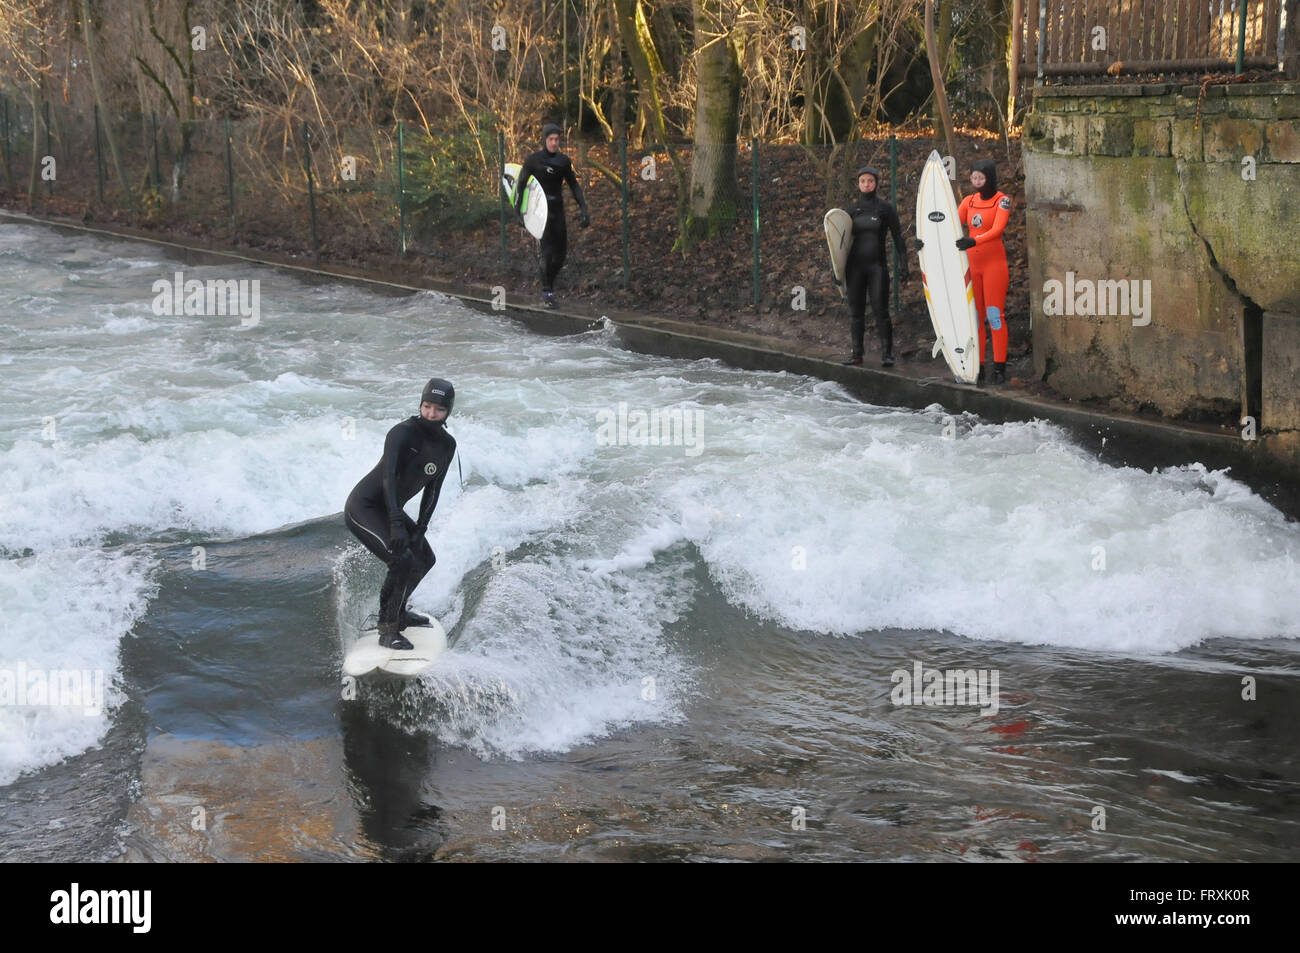 River surfer in the English Garden park, winter in Munich, Bavaria, Germany Stock Photo